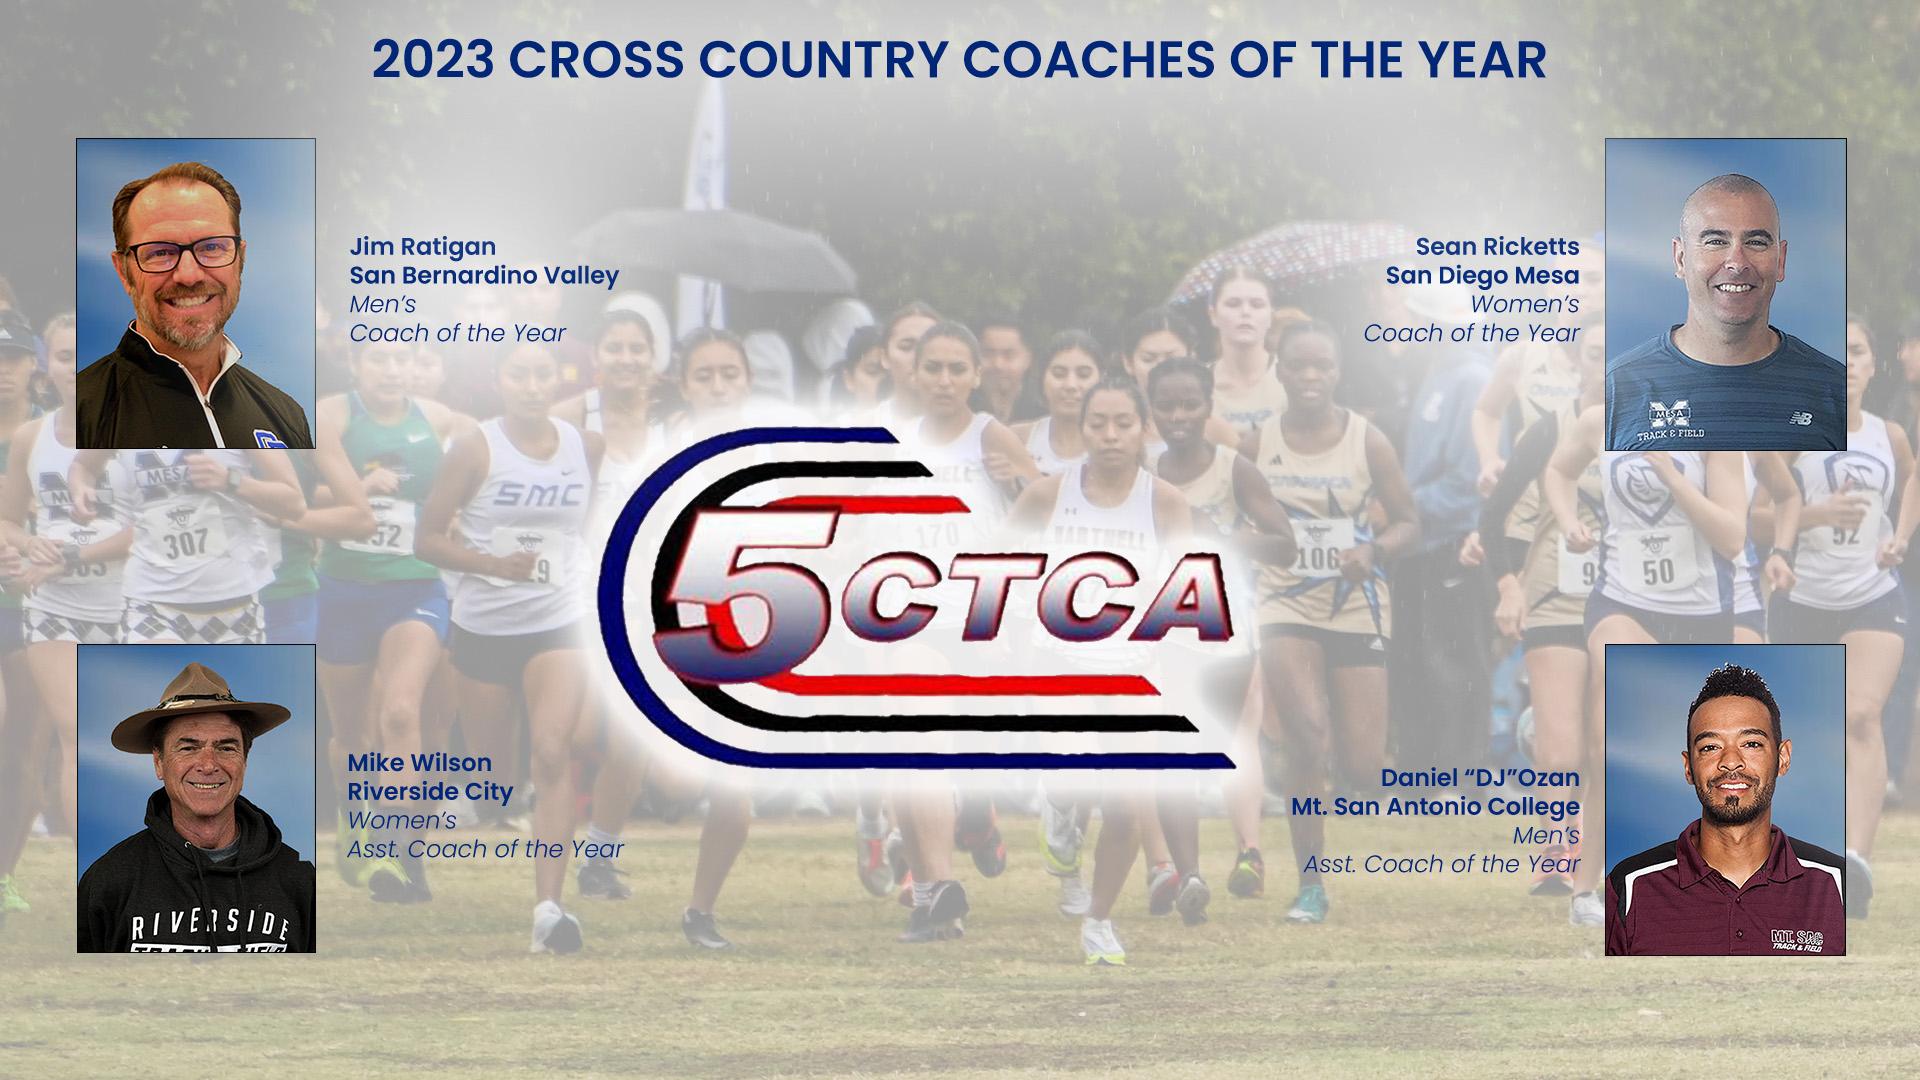 RCC's Wilson Named Assistant Coach of the Year